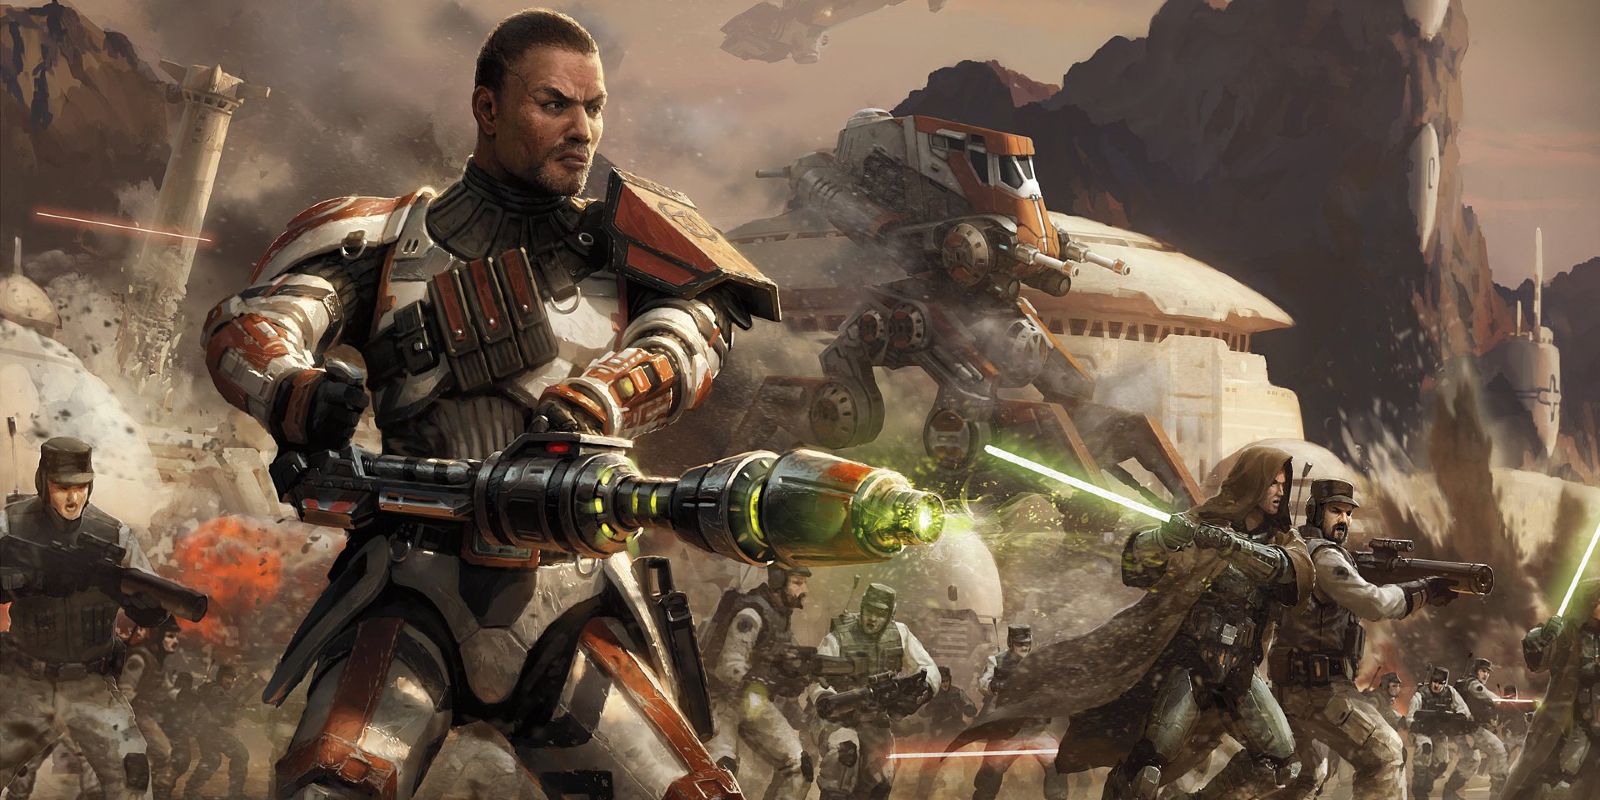 Star Wars: The Old Republic - Every Class Story, Ranked